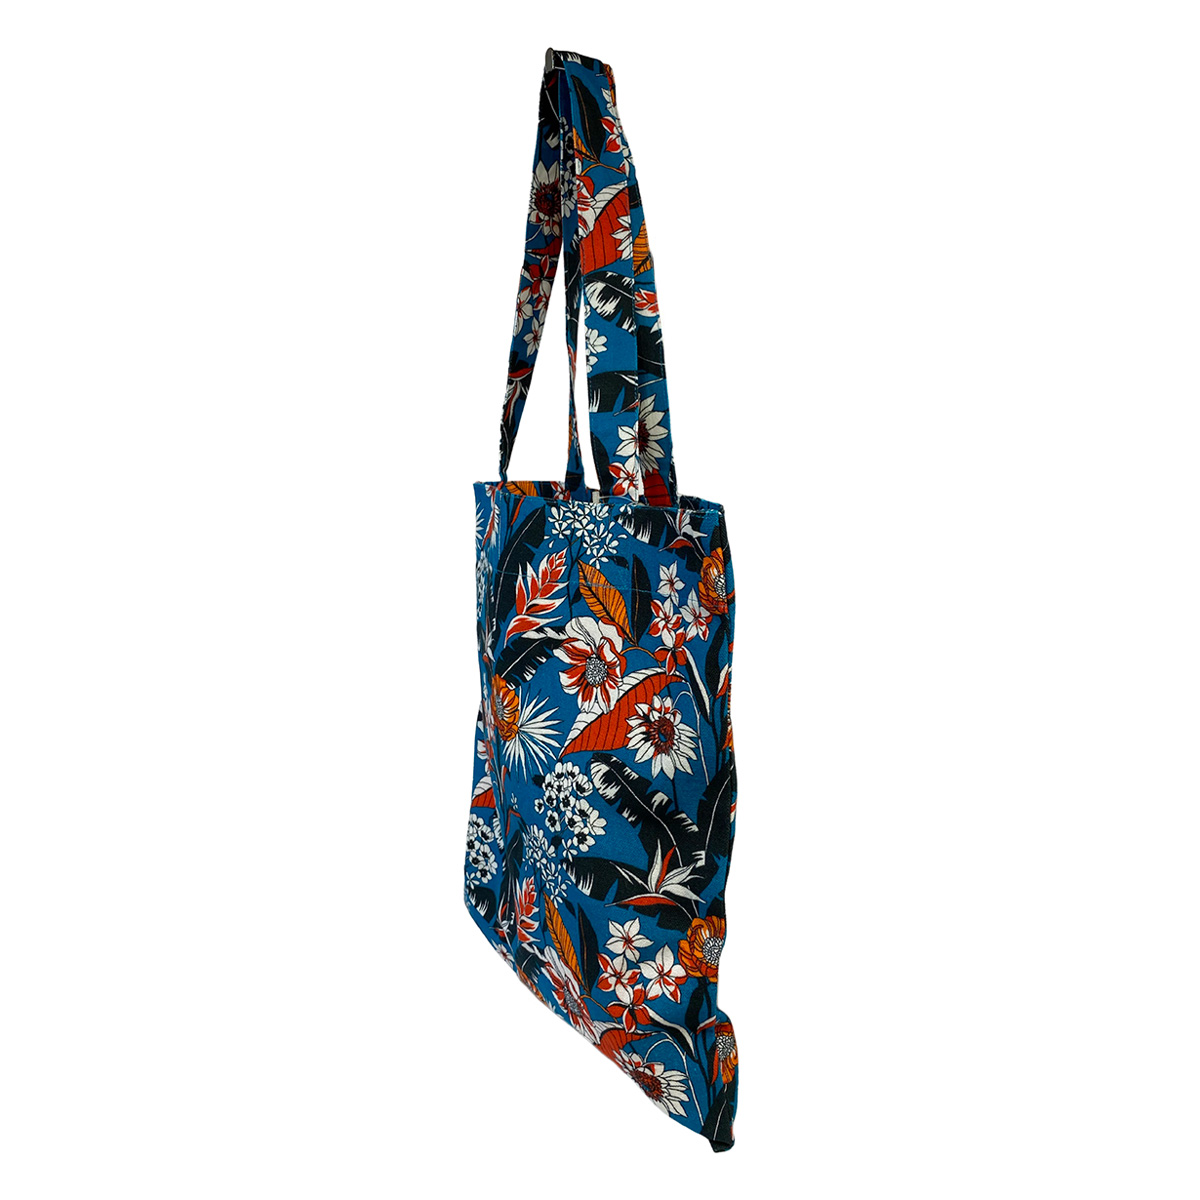 Standard Tote in Blue Botanical – Collective Heart